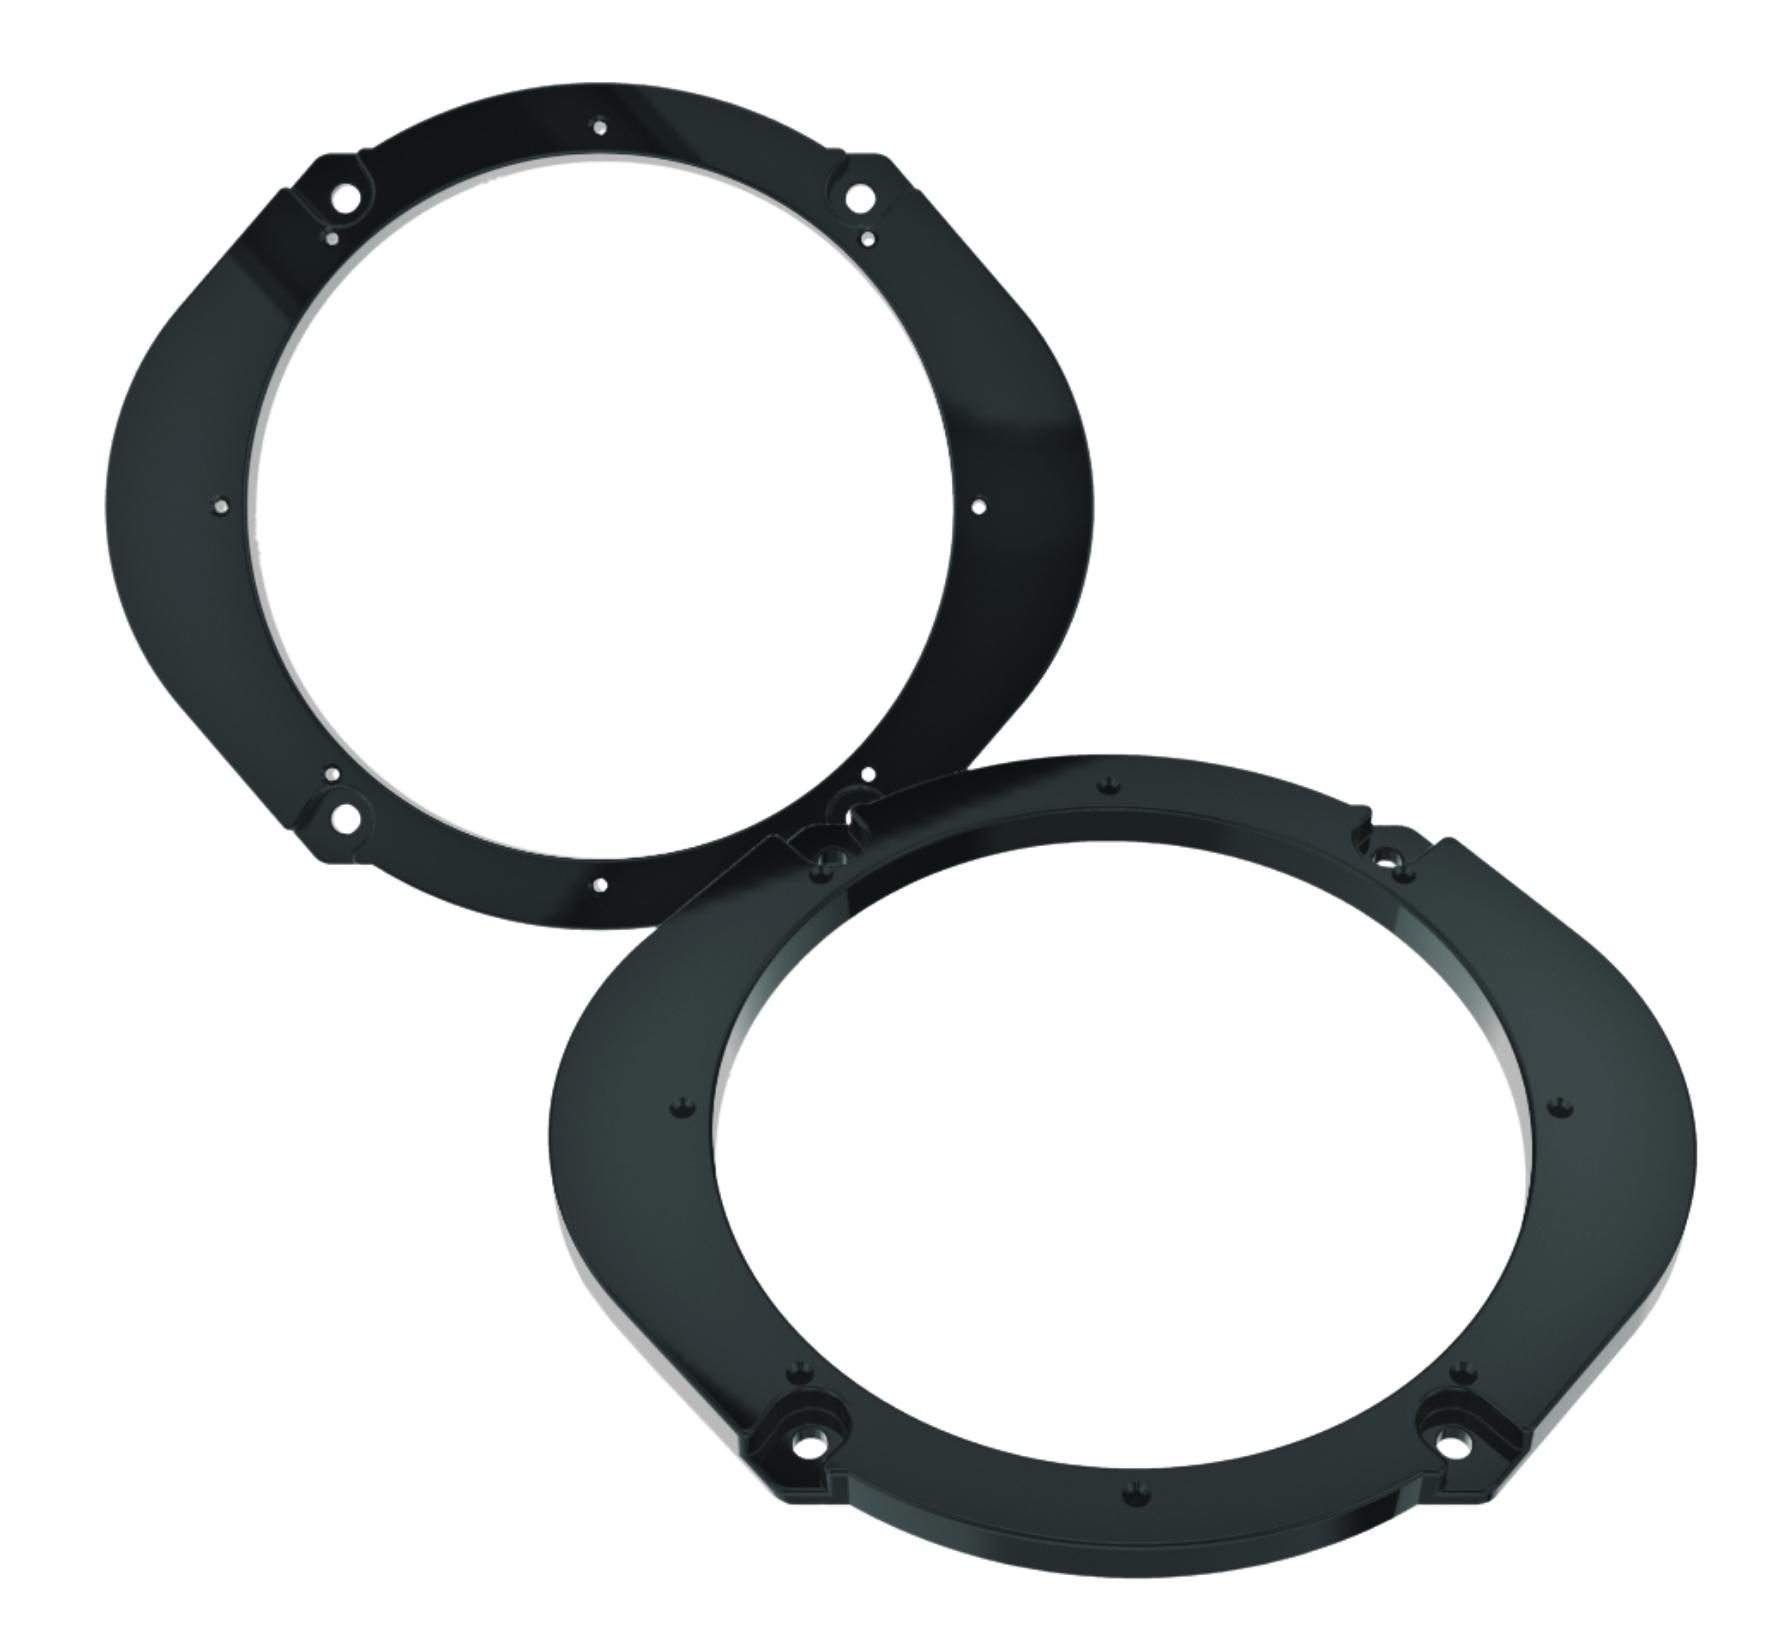 & Metra 72-5600 Ford Speaker Harness 1998-UP Pair Scosche SA68 Universal 5 x 7 or 6 x 8 to 5.25-6.5 Speaker Adapter 